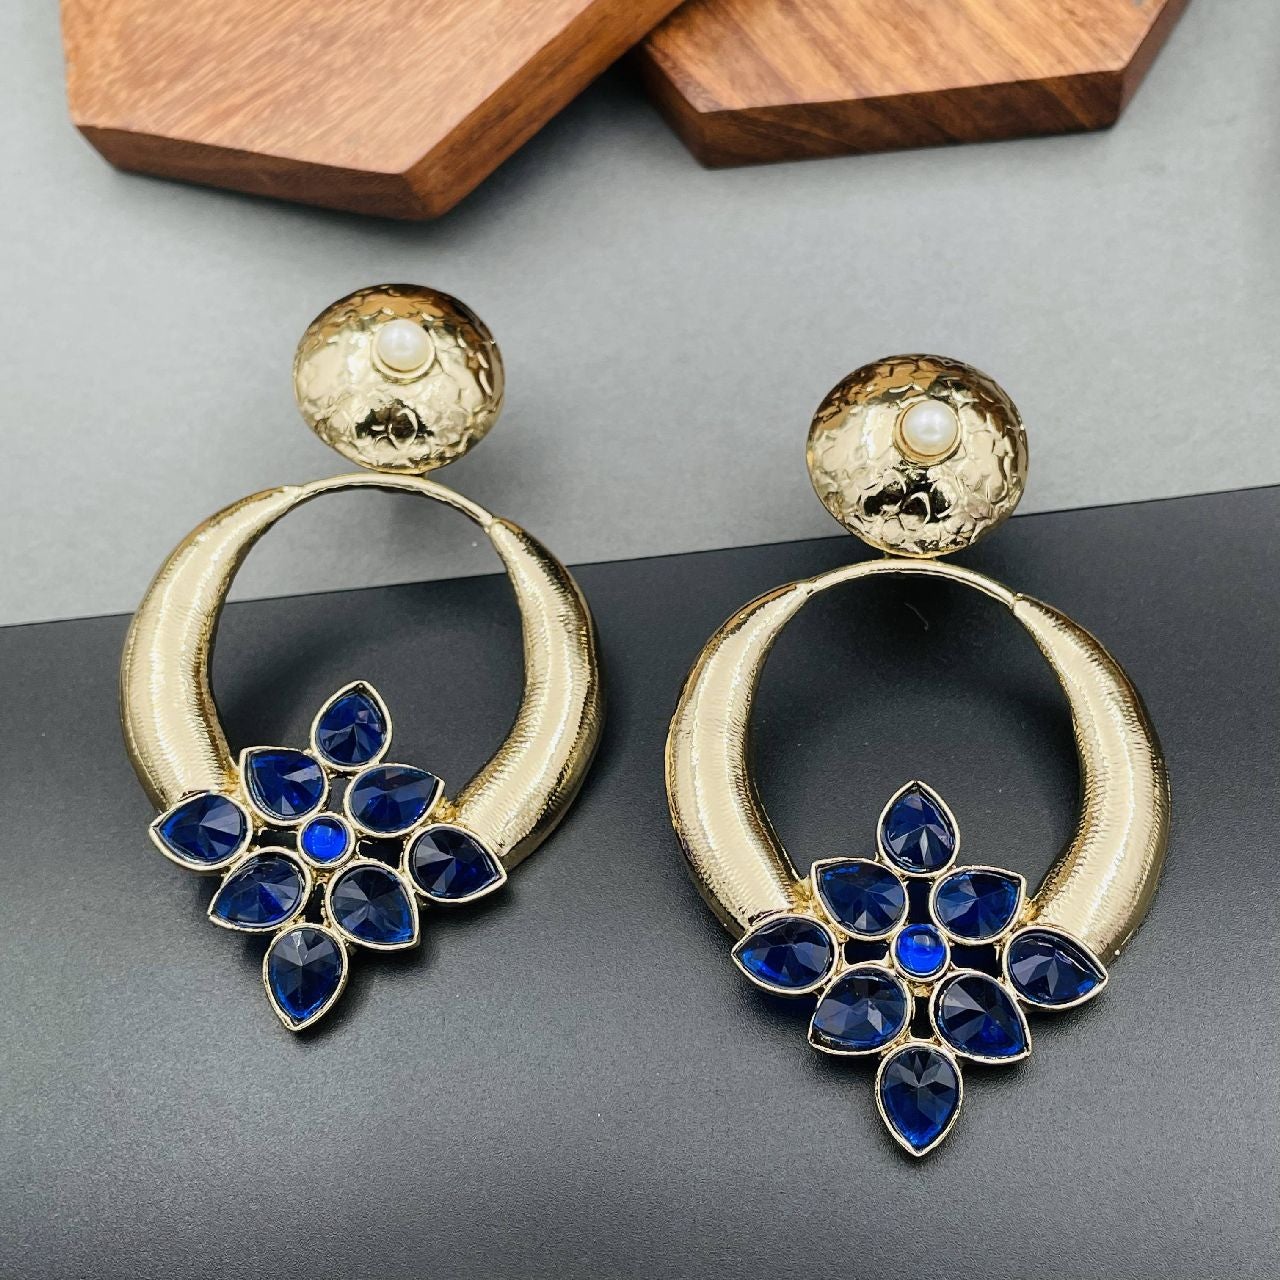 Gold Tone Navy Blue Stone Clip On Earrings With Rope Edge | eBay